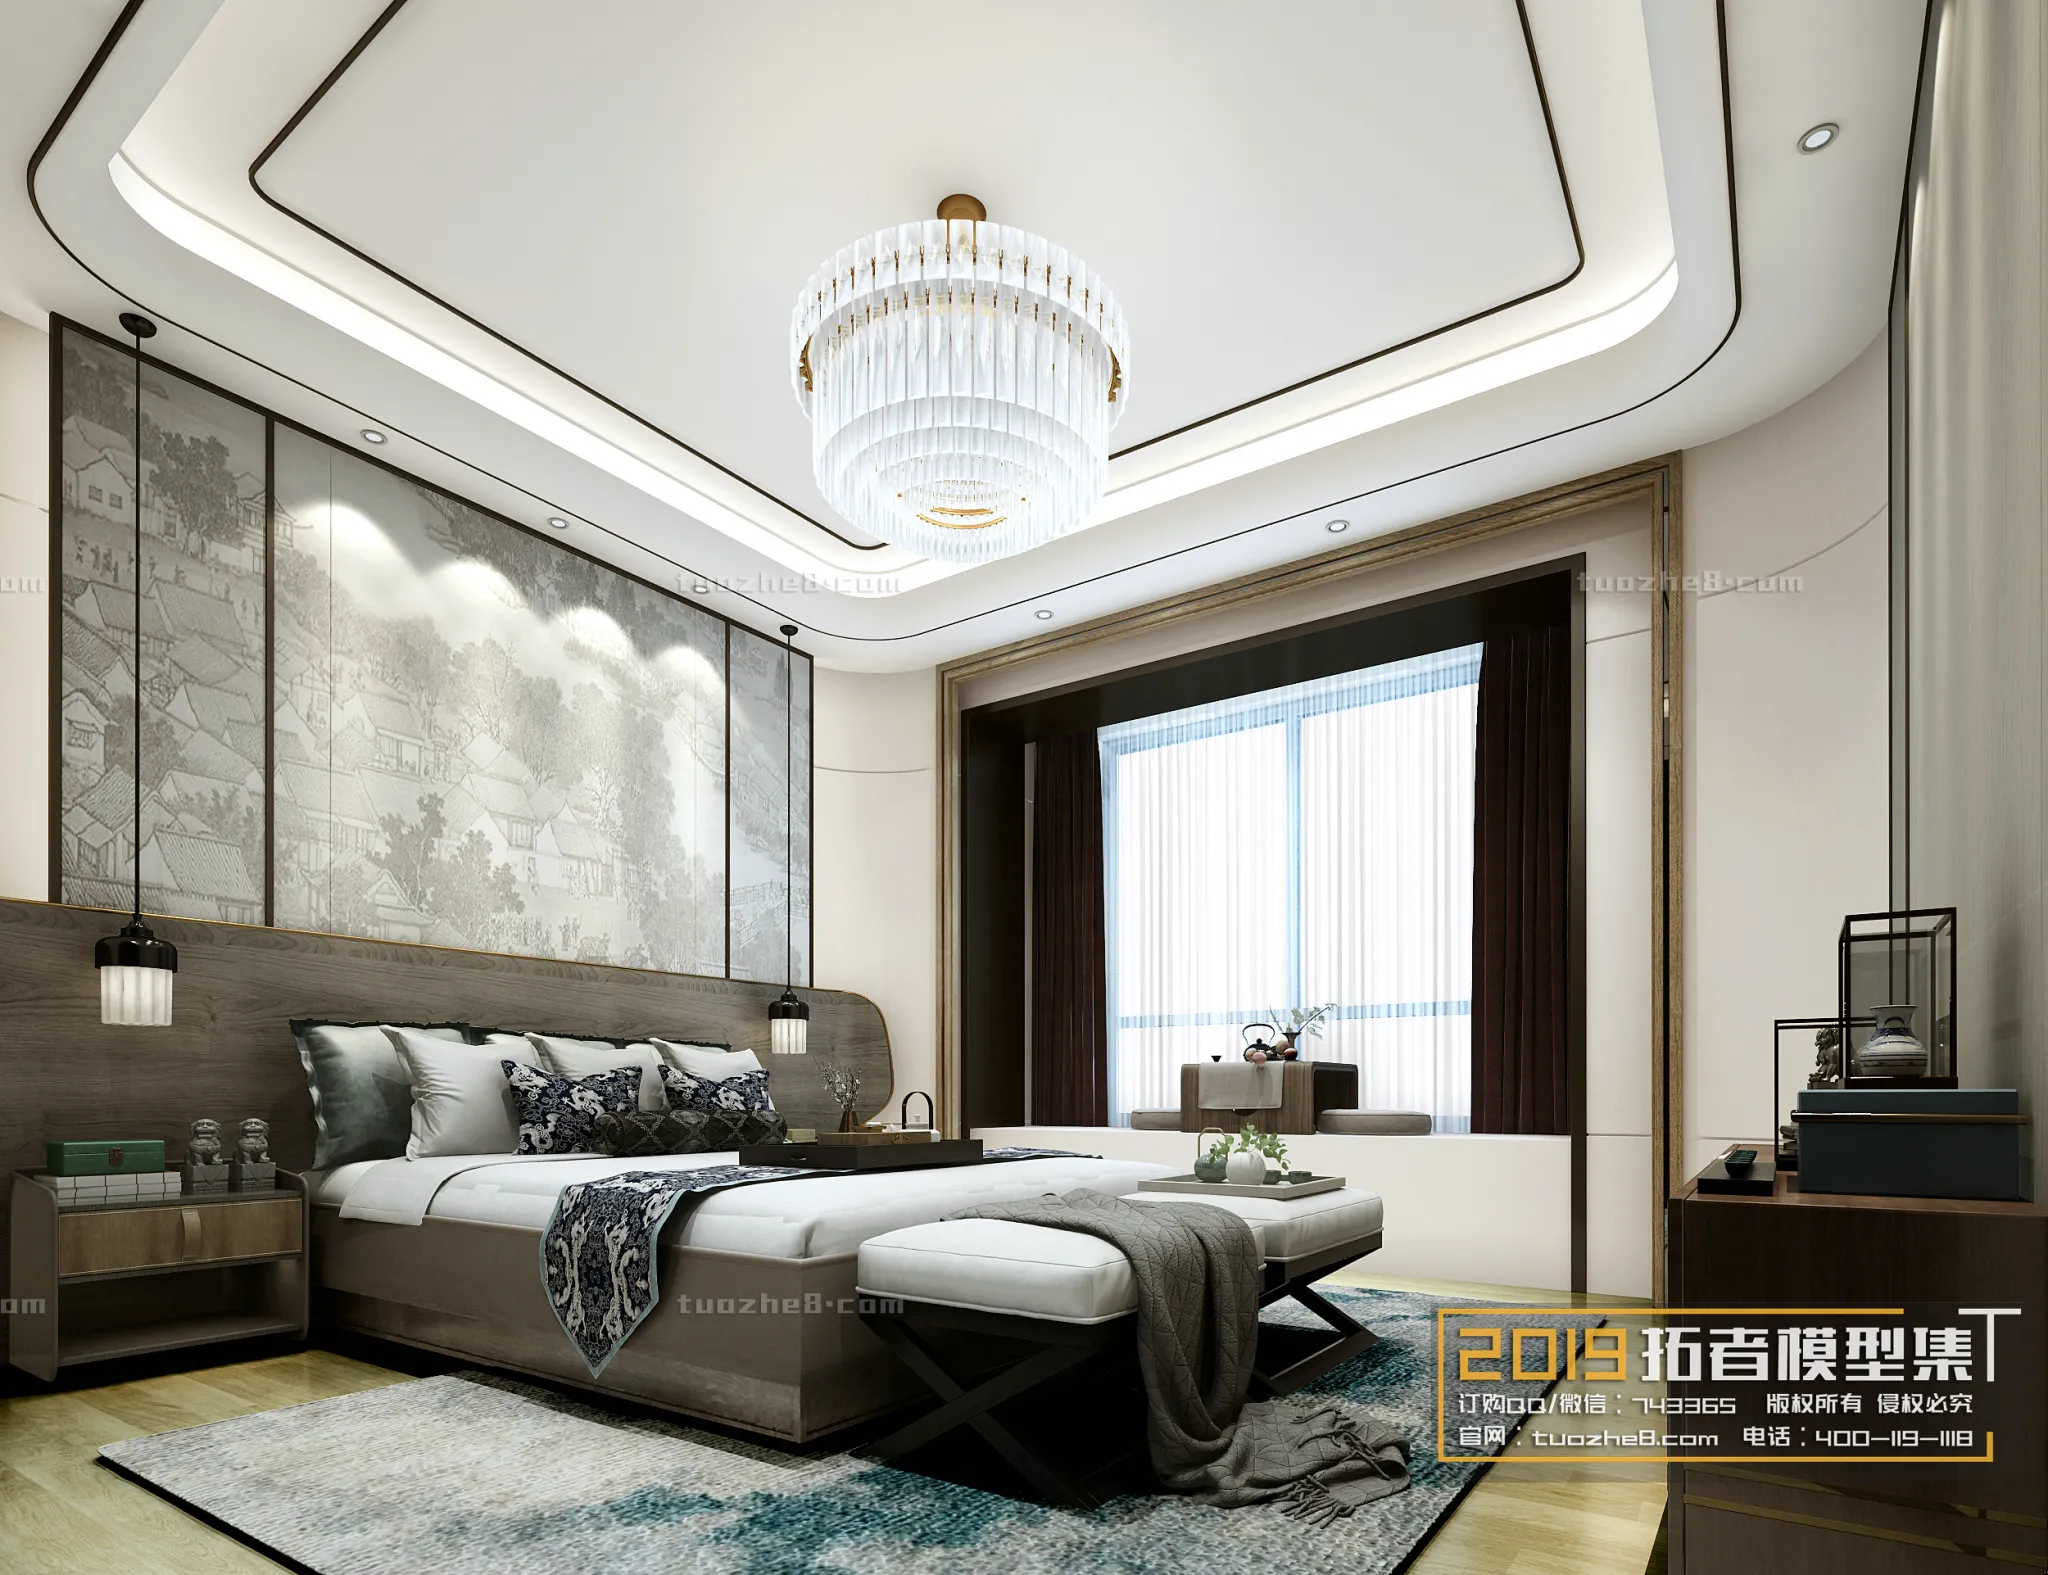 Extension Interior – BEDROOM – CHINESE STYLES – 001